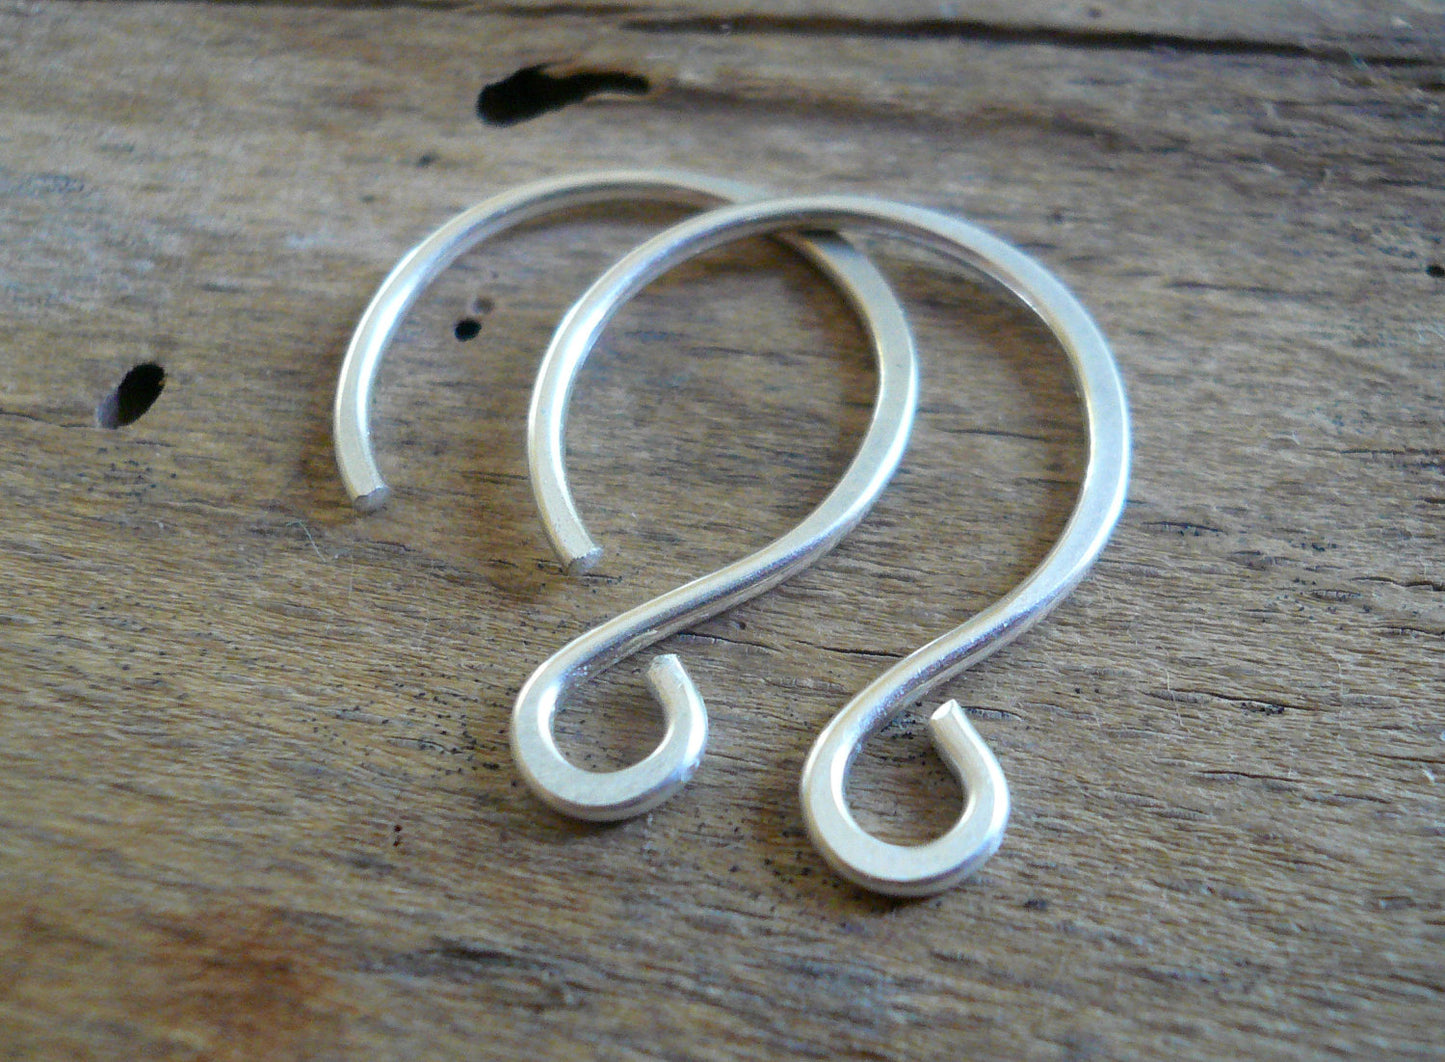 HEAVY 18 gauge Large Solitude Sterling Silver Earwires - Handmade. Handforged. Heavily Oxidized